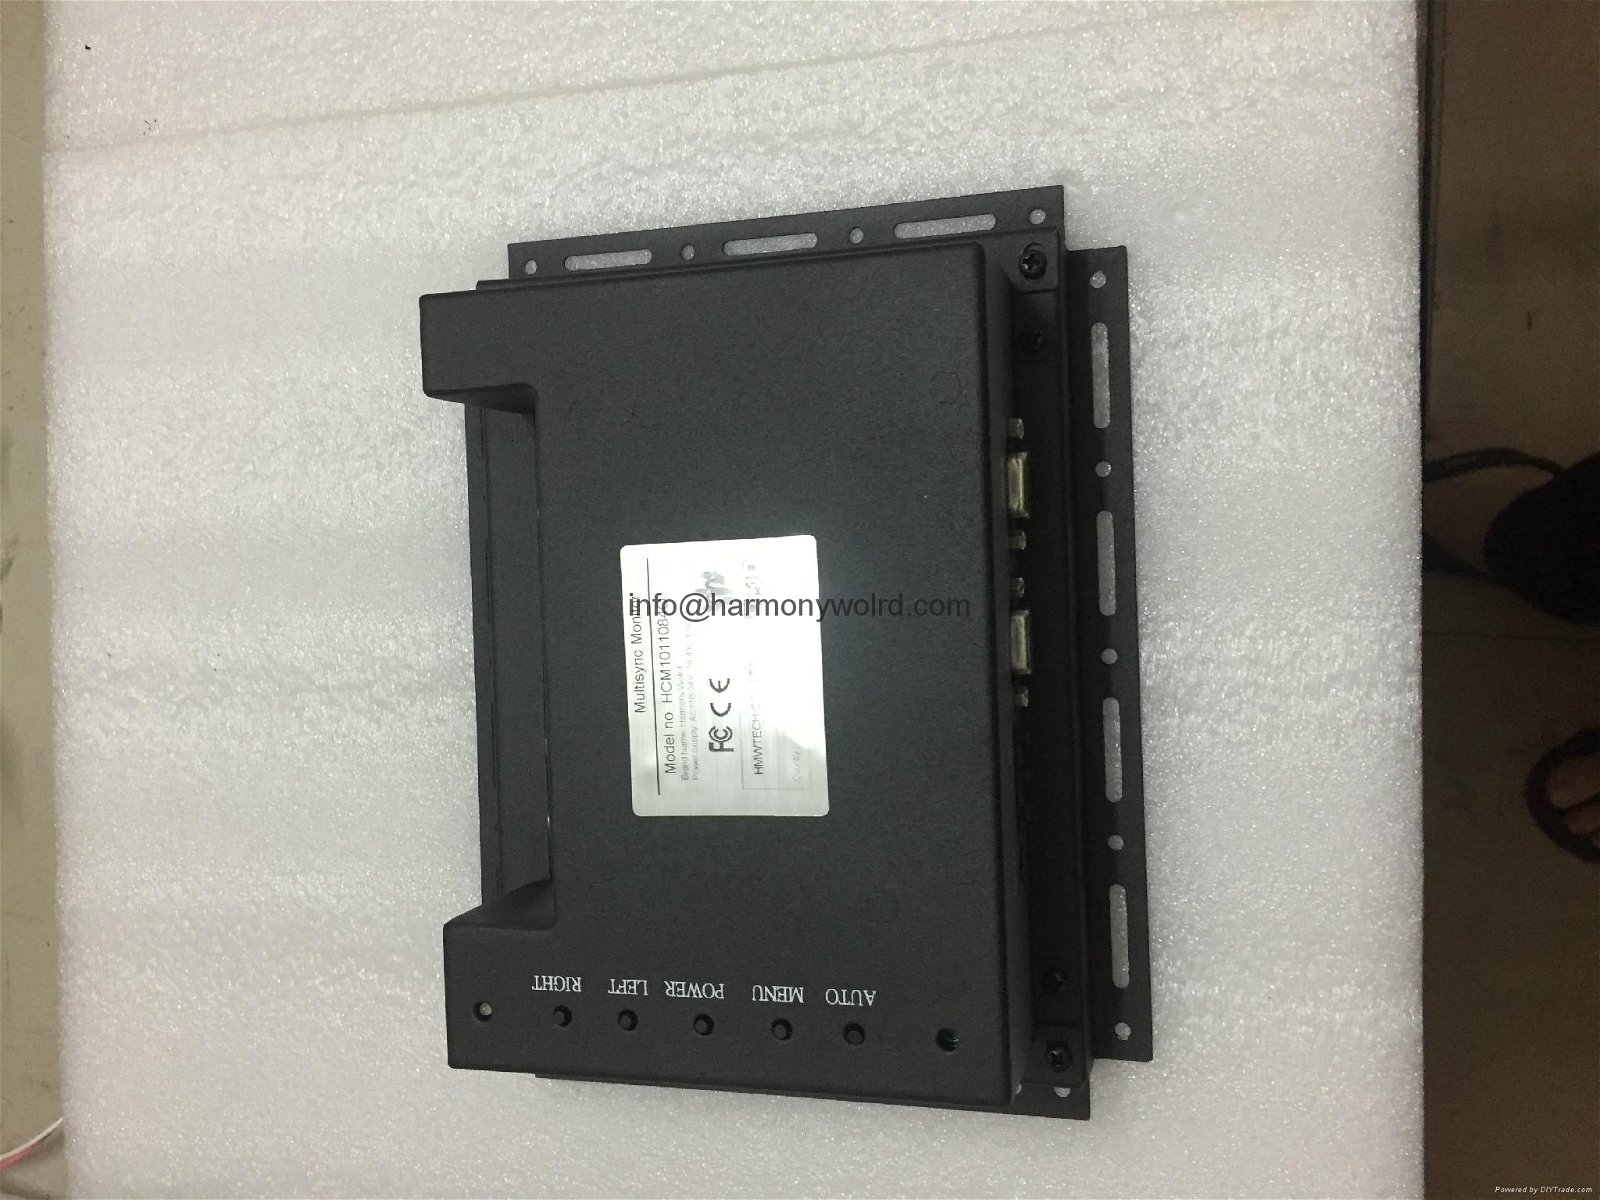 Upgrade MM-FMC3-010 Modicon Monitors MM-FMN3-000 MM-KPSD-000 MM-ONC2-000 to LCDs 2